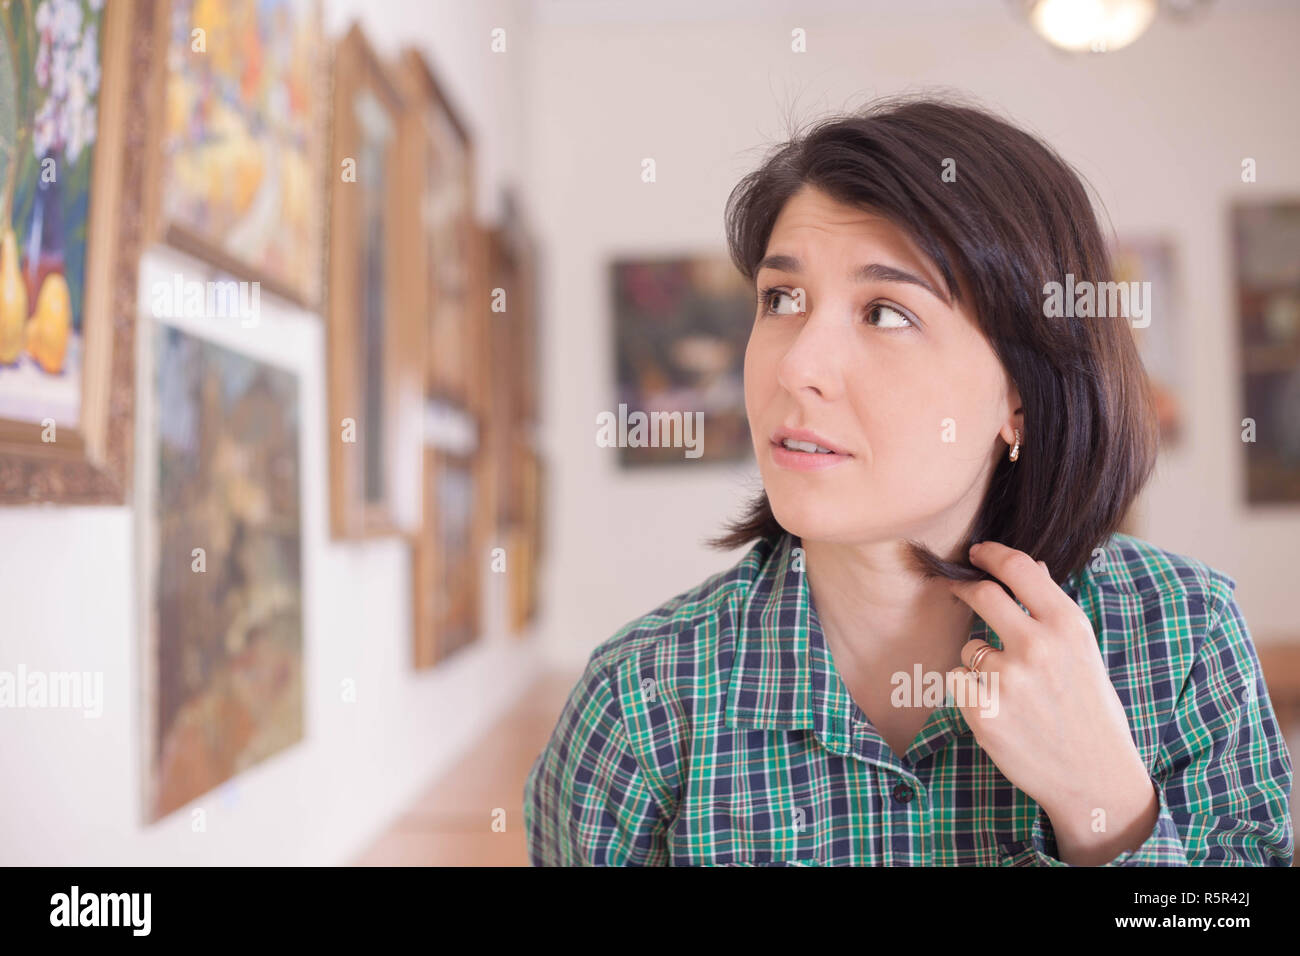 A young beautiful woman looking at painting in an art gallery. Stock Photo